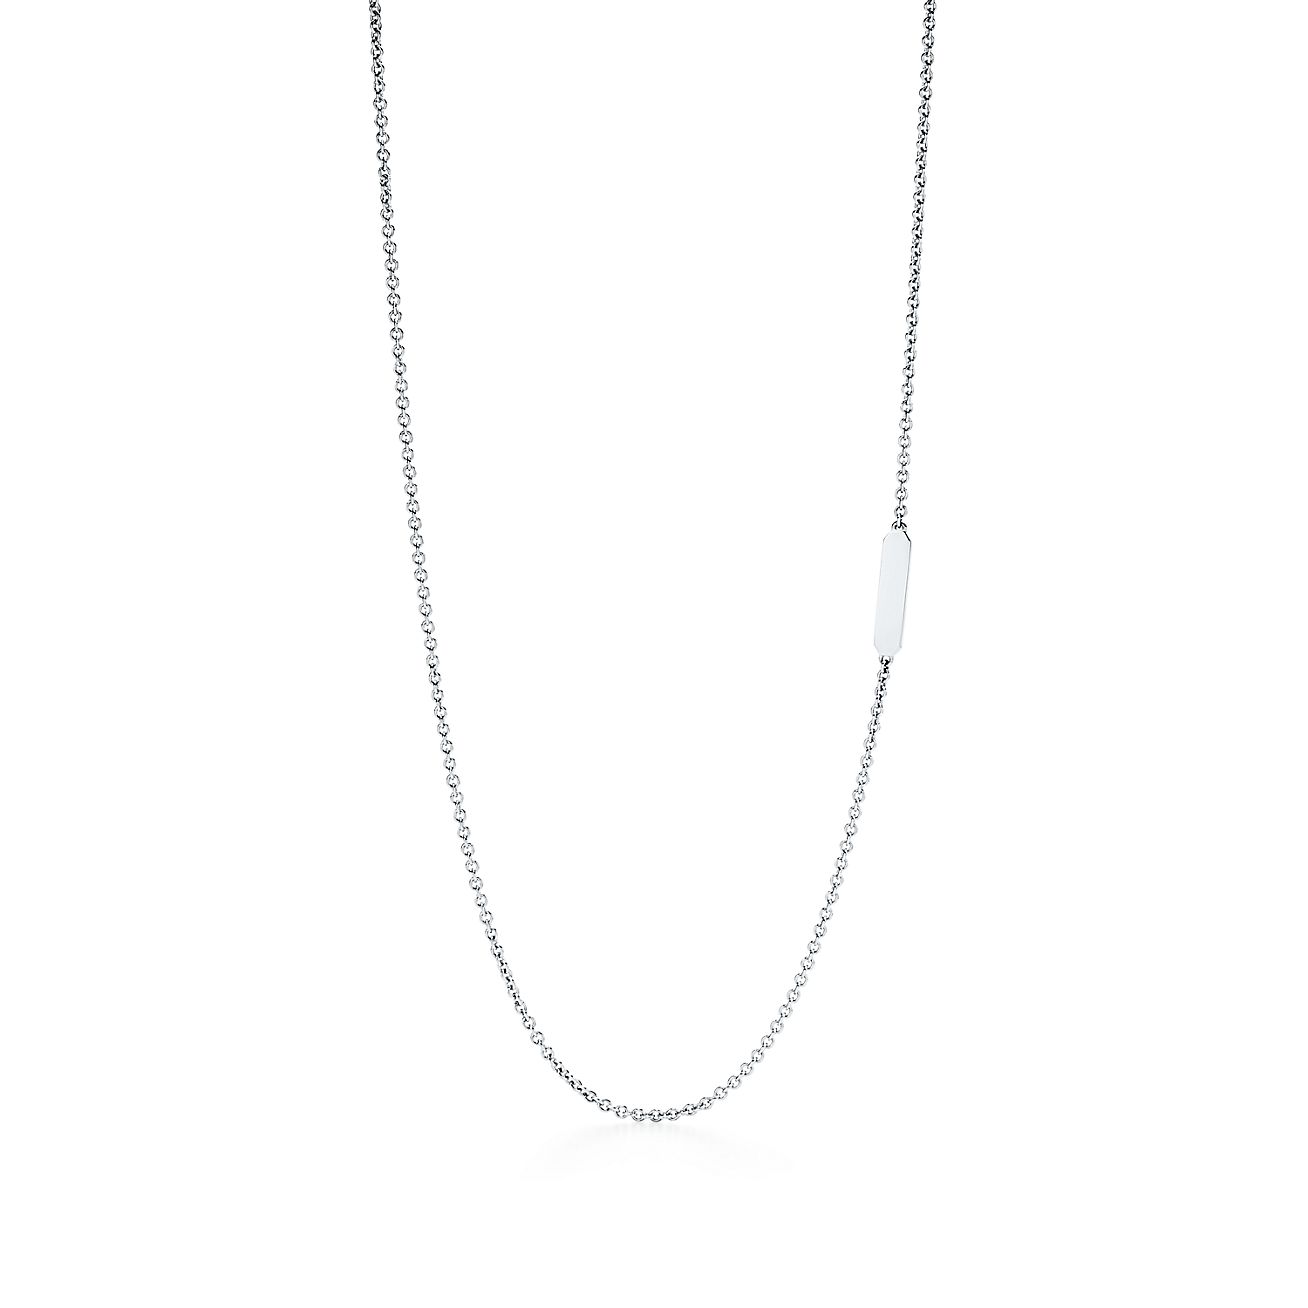 Tag chain necklace in sterling silver 